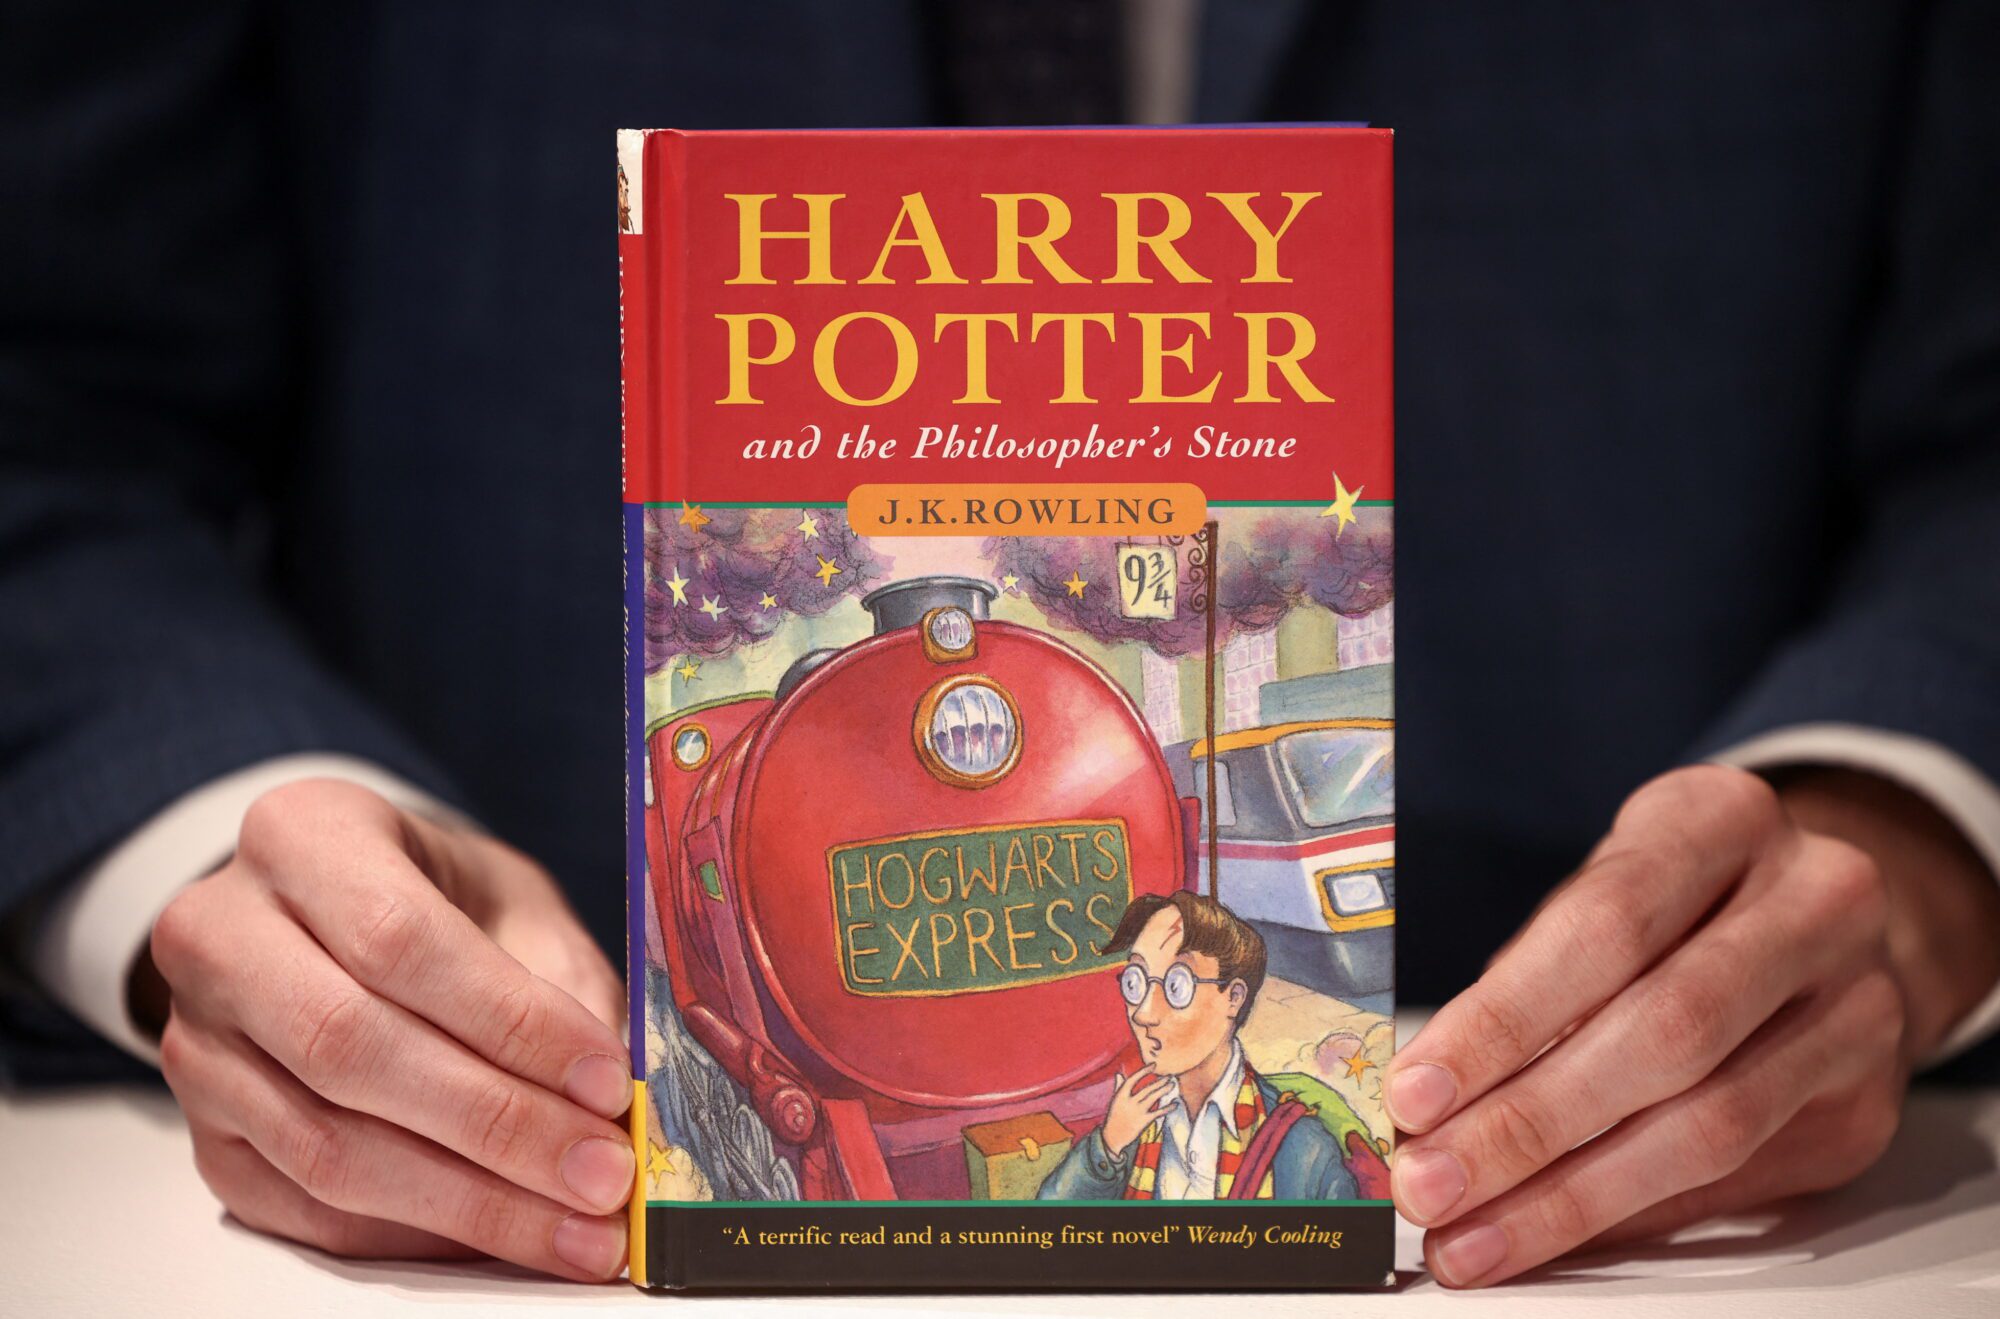 A rare first edition and signed by the author copy of 'Harry Potter and the Philosophers Stone' by British author J.K. Rowling, which is to be put up for auction at Christie's auction house in London, Britain May 31, 2022. REUTERS/Henry Nicholls